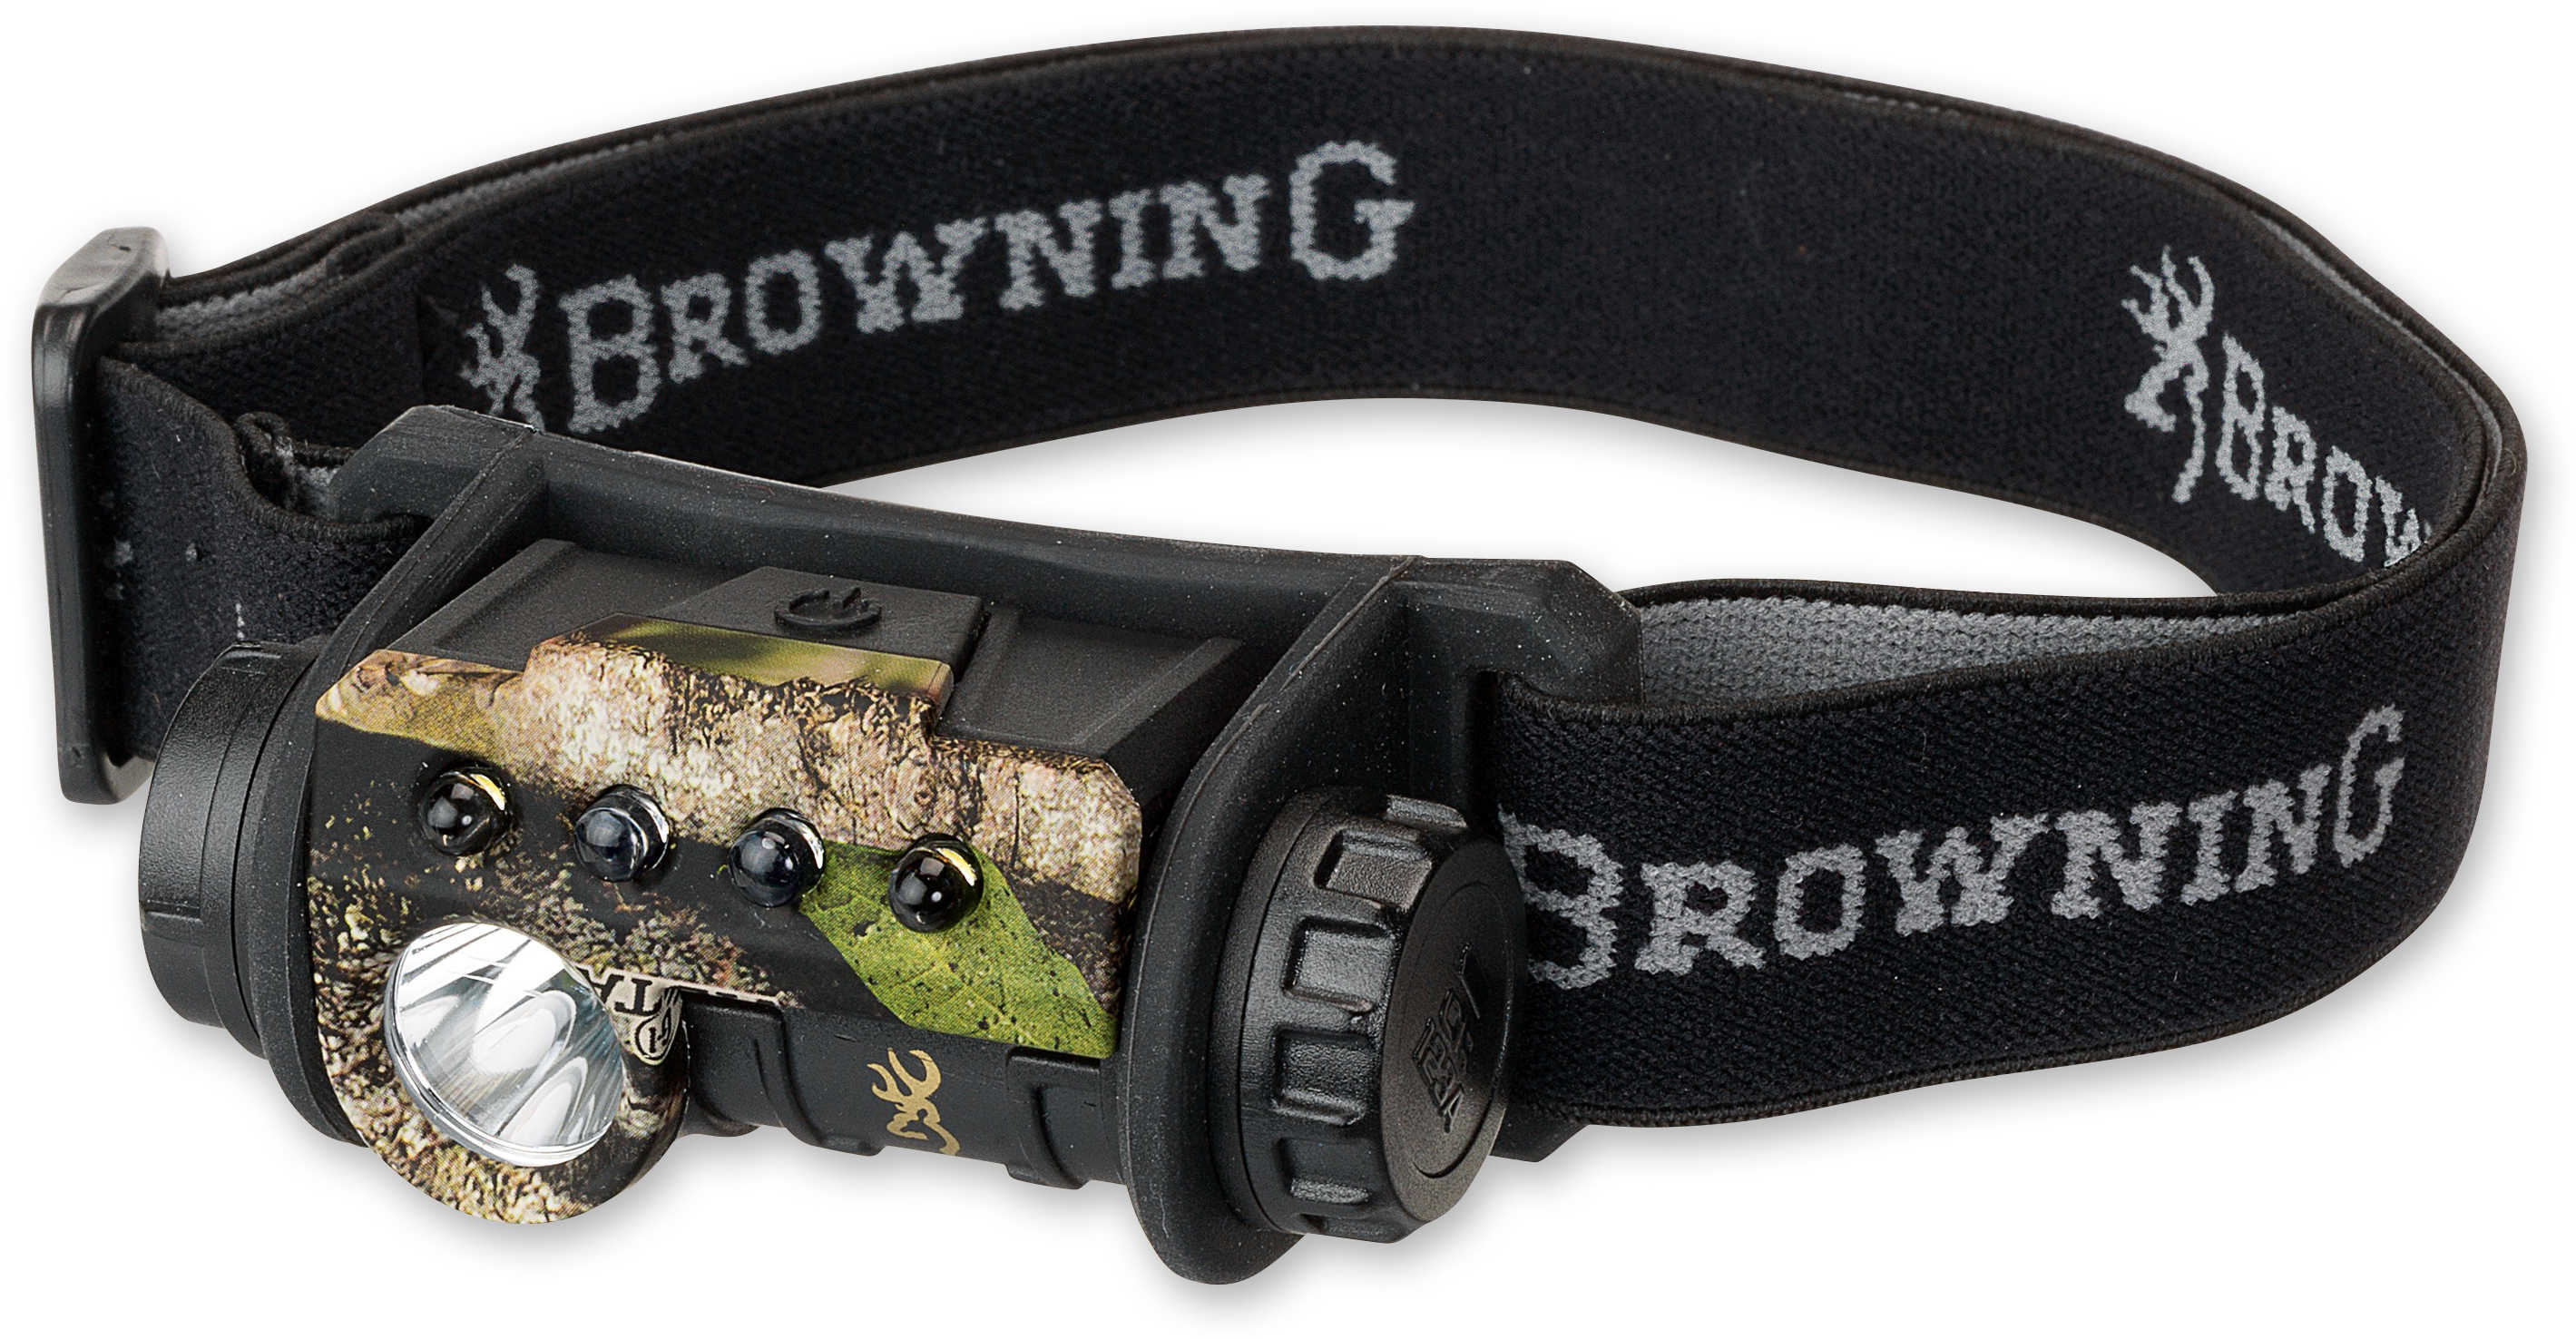 Browning Epic Water Resistant 225 Lumen, Green/White Md: 3718650